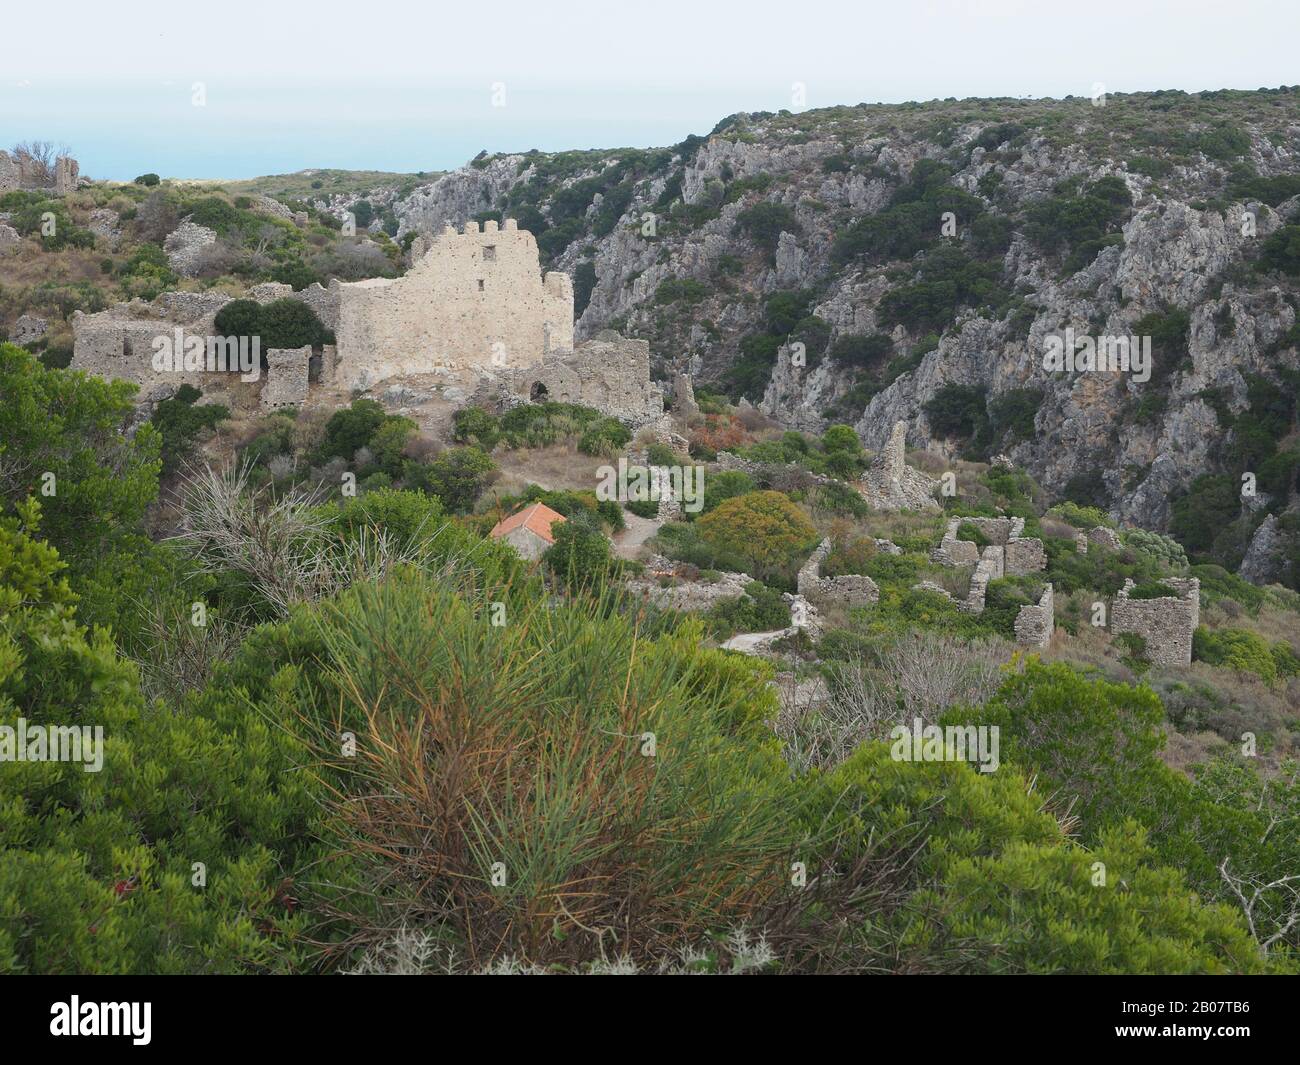 The ruined fortress/castle of Paleochora. Kythira's Byzantine capital built by Monemvasians in the 12th century and named the city of Agios Dimitrios. Stock Photo